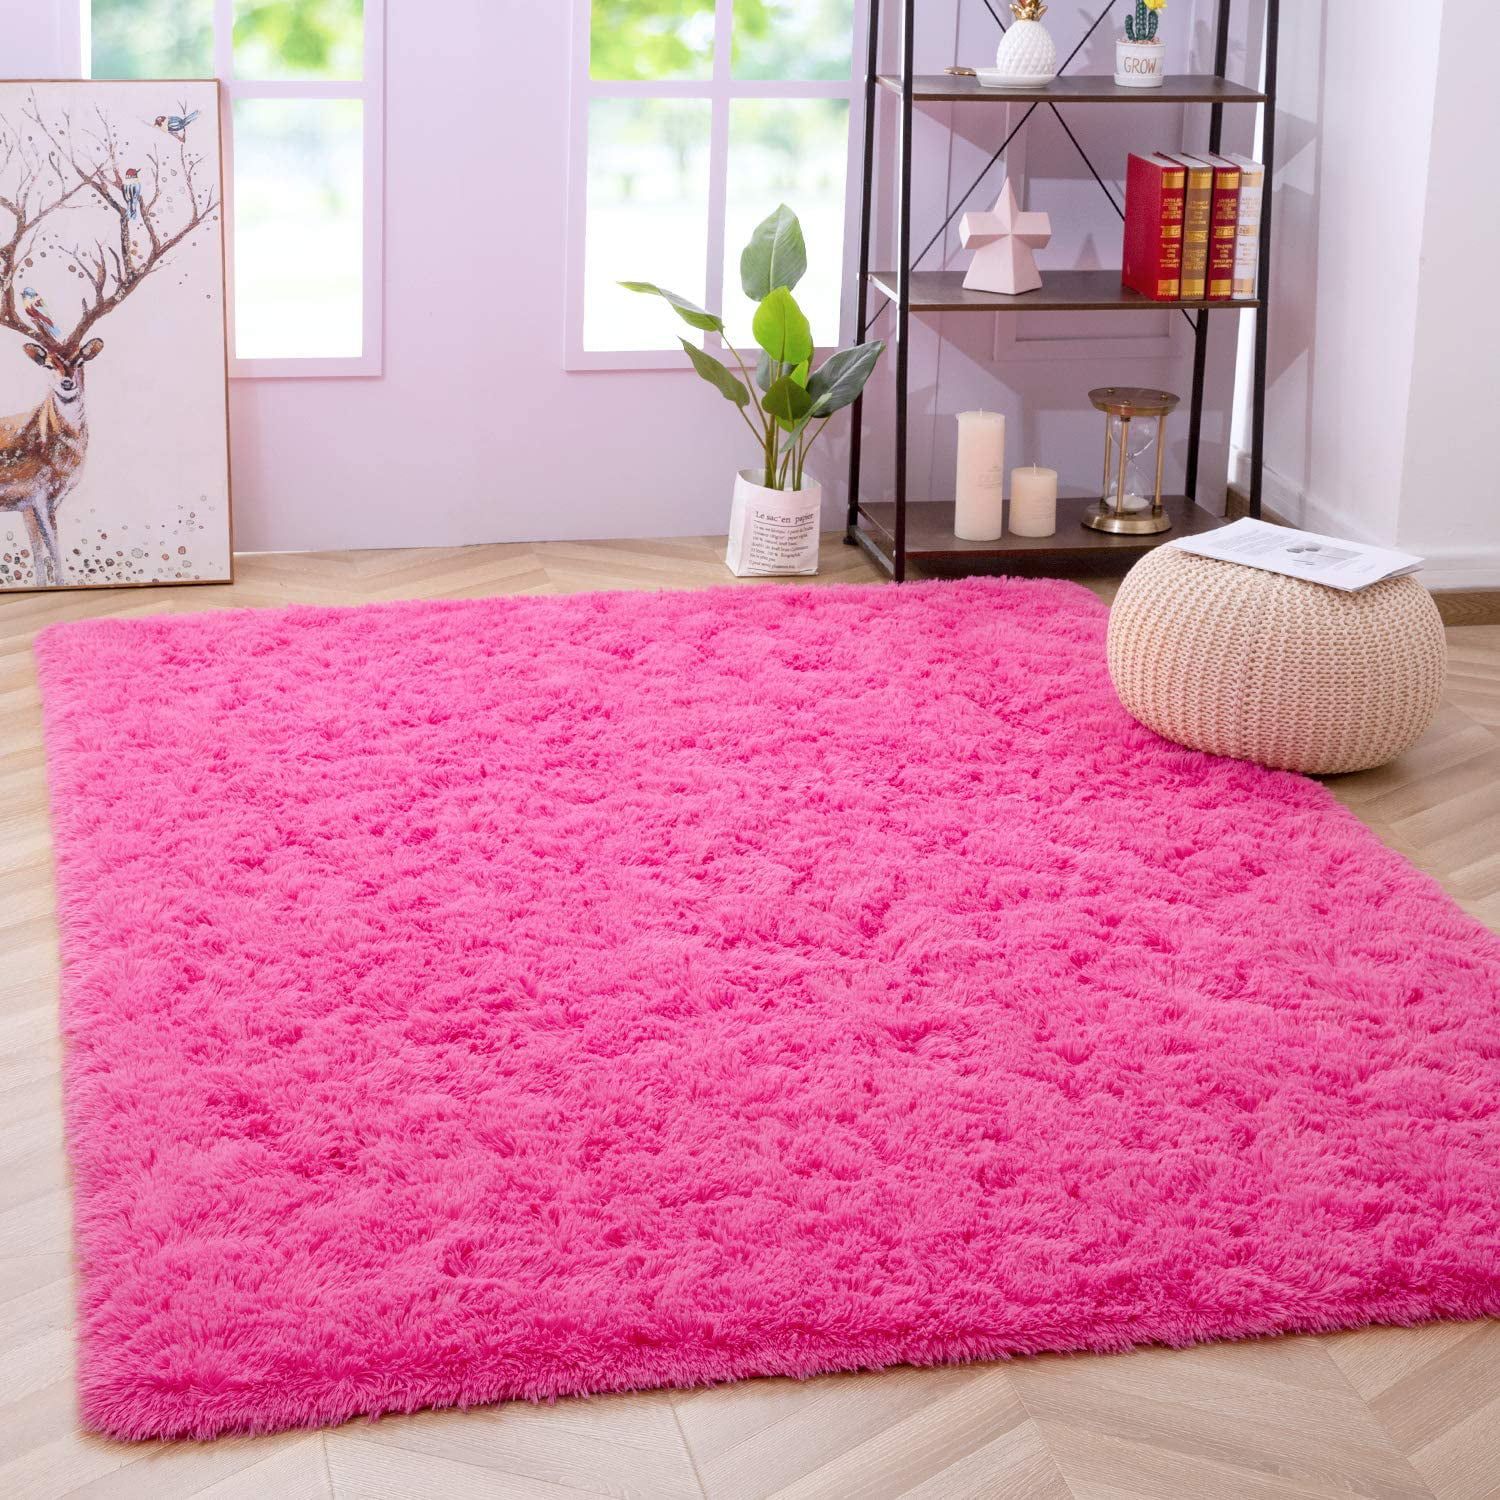 Lochas Luxury Fluffy Rugs Ultra Soft Shag Rug For Bedroom Living Room Kids  Room, Children,6'x9',hot Pink – Walmart Regarding Pink Soft Touch Shag Rugs (View 7 of 15)